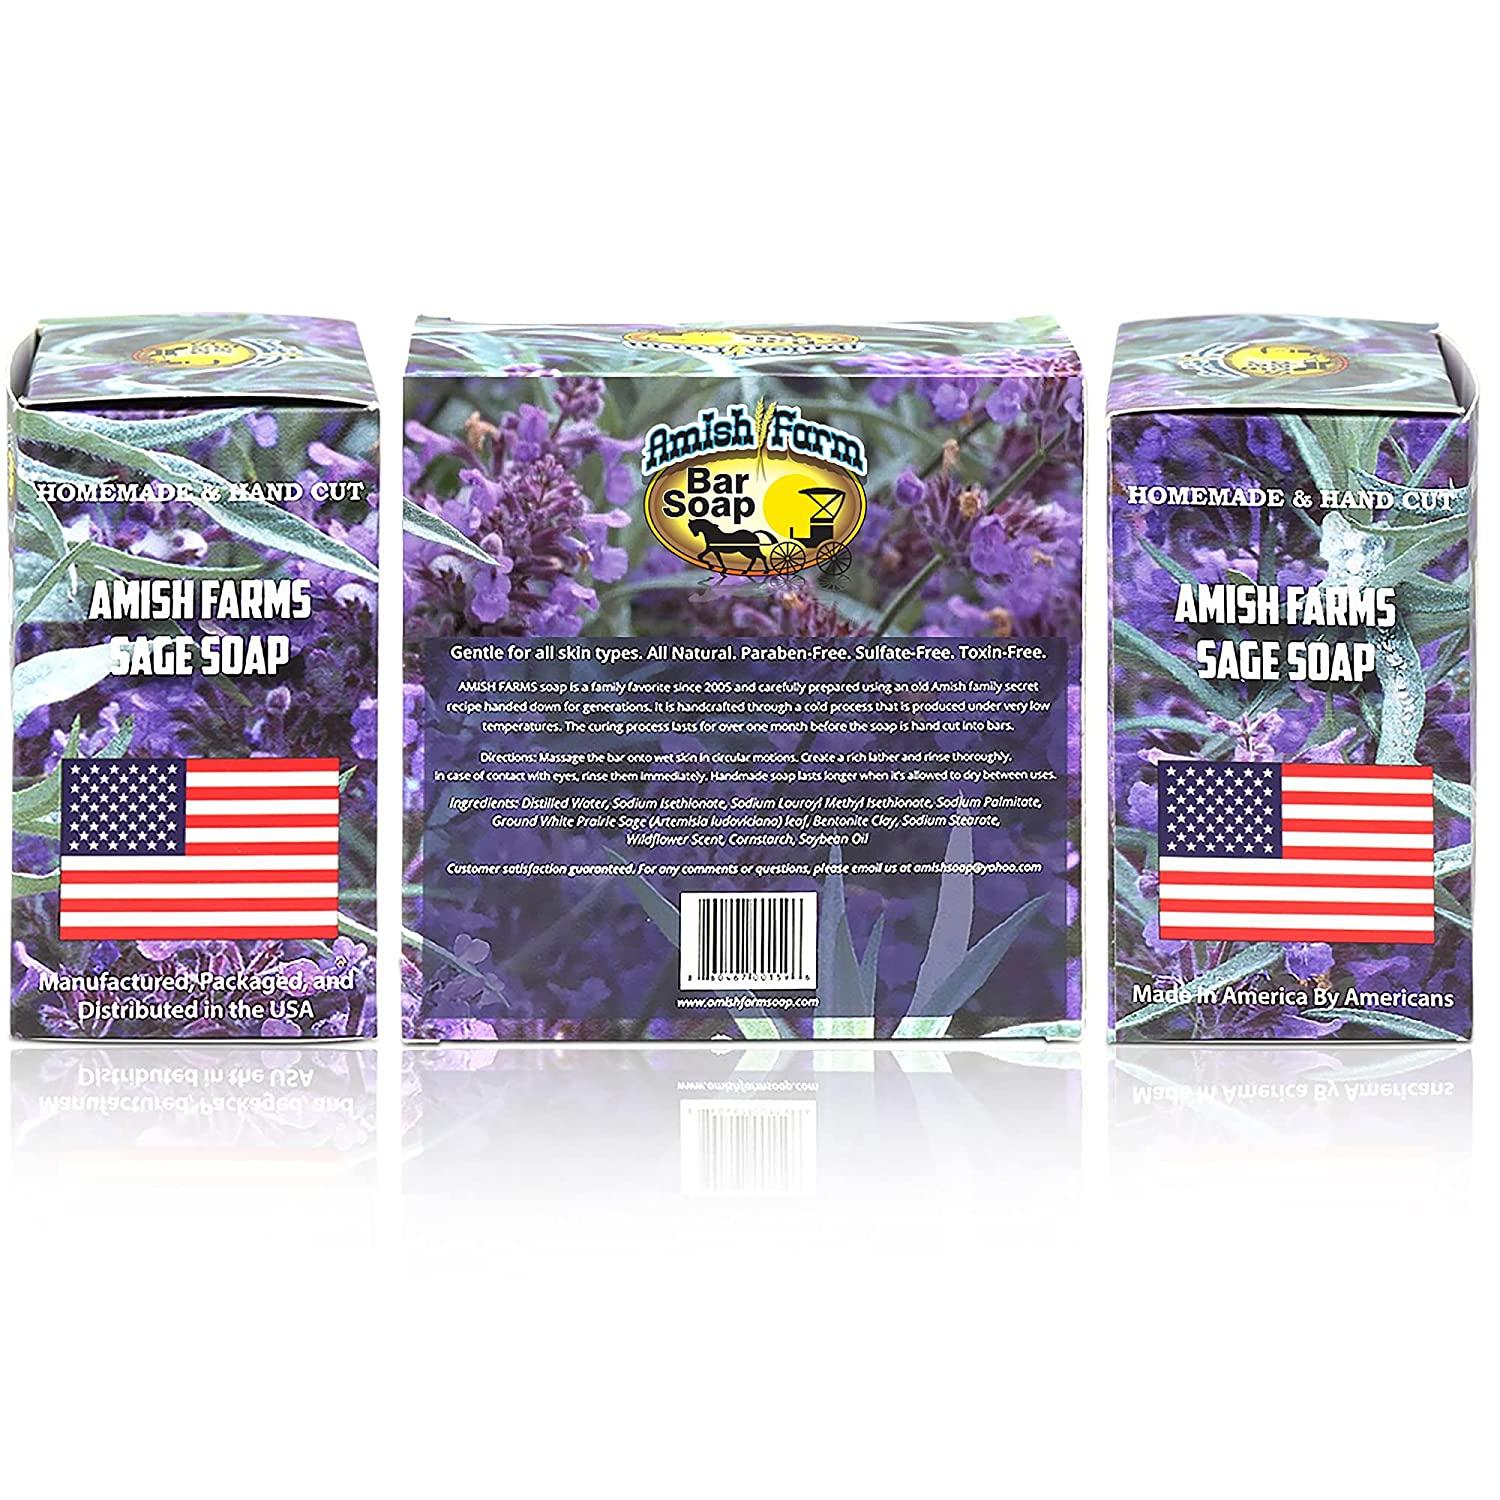 Amish Farms Natural Soap Bar (4 Bars) With Exfoliating Sage, Clean Lavender  Scent, Made in USA - Homemade, Handcut, Vegan Face & Body Soap Scrub for